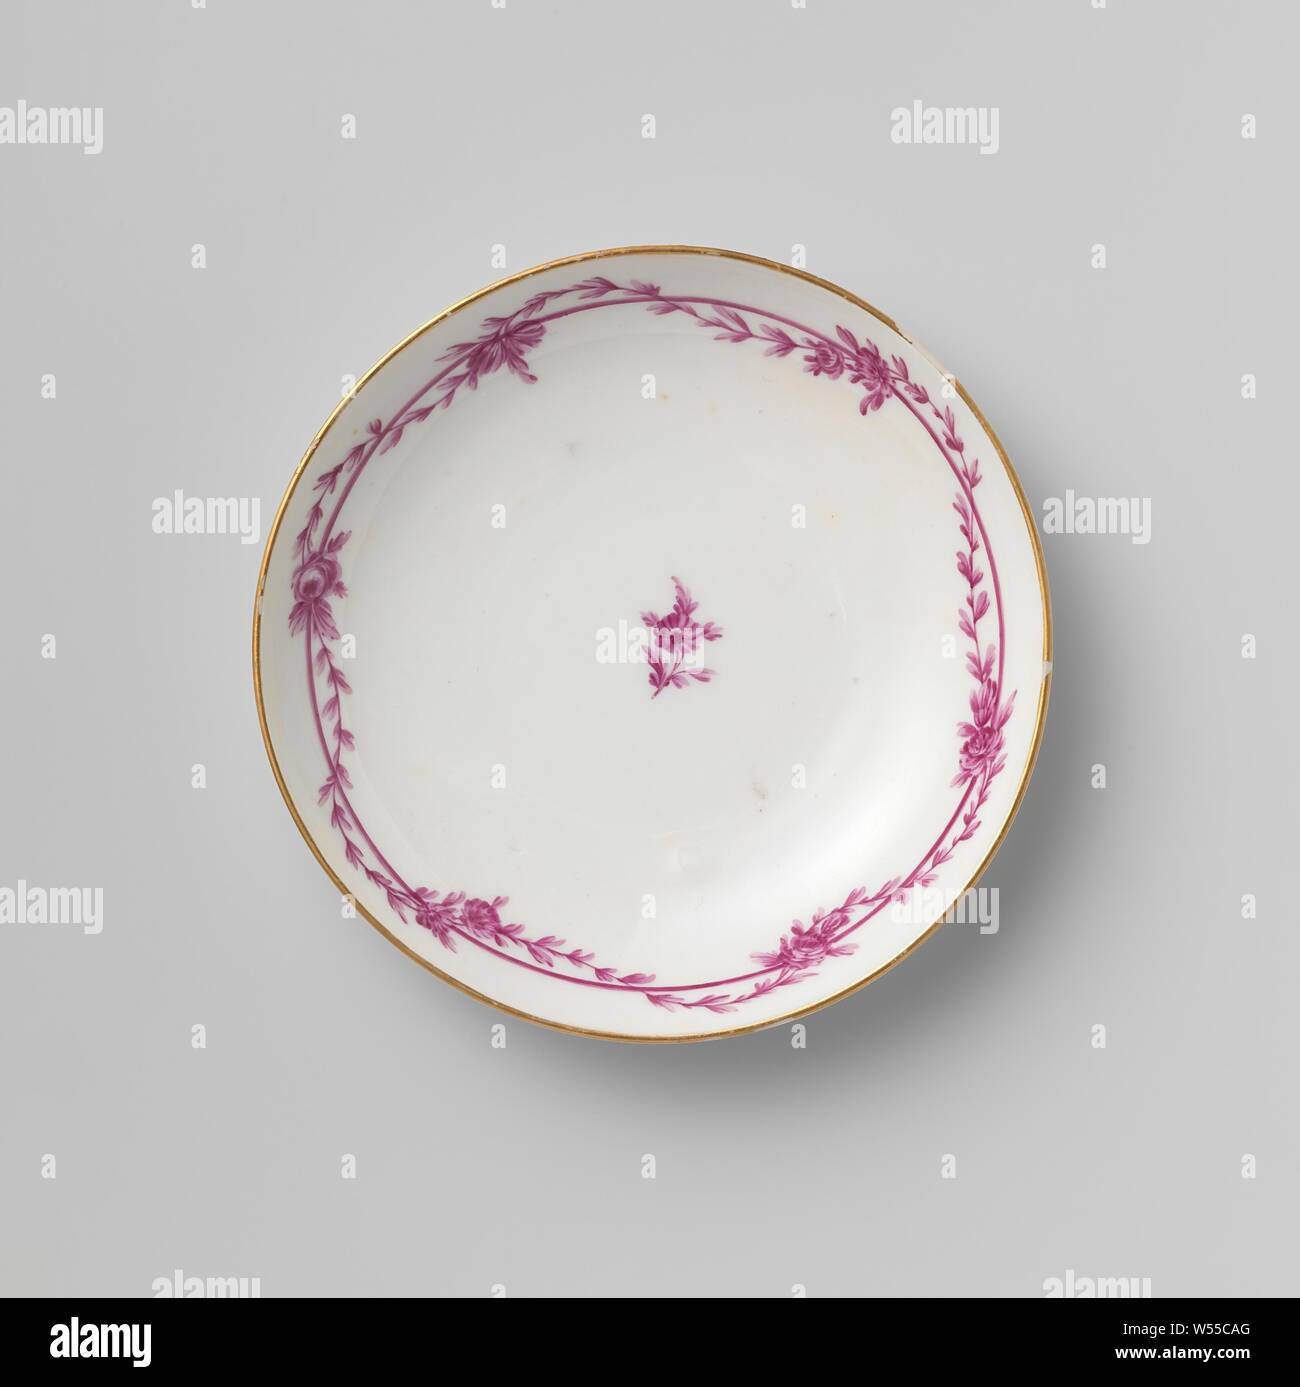 Saucer, Porcelain saucer, decorated in beet red with a flower and leaf garland flung around a continuous band. The edges are gilded. Decorated with beetroot flowers. Signature M.O.L. with star in underglaze blue., Manufactuur Oud-Loosdrecht, Loosdrecht, c. 1780, porcelain (material), d 12.1 cm × h 2.2 cm Stock Photo